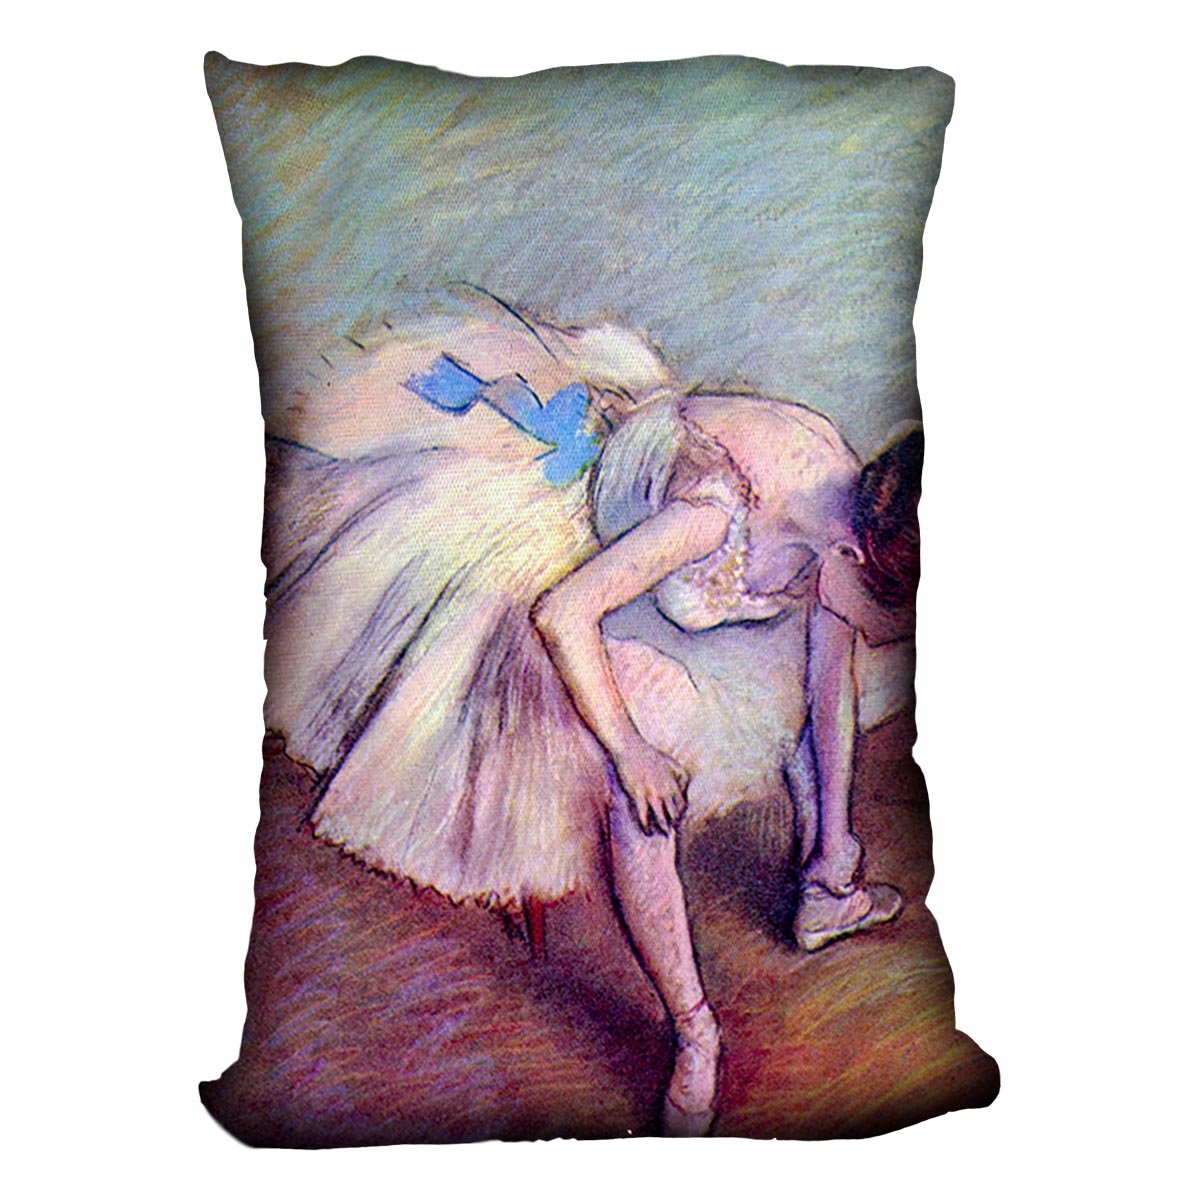 Dancer bent over by Degas Cushion